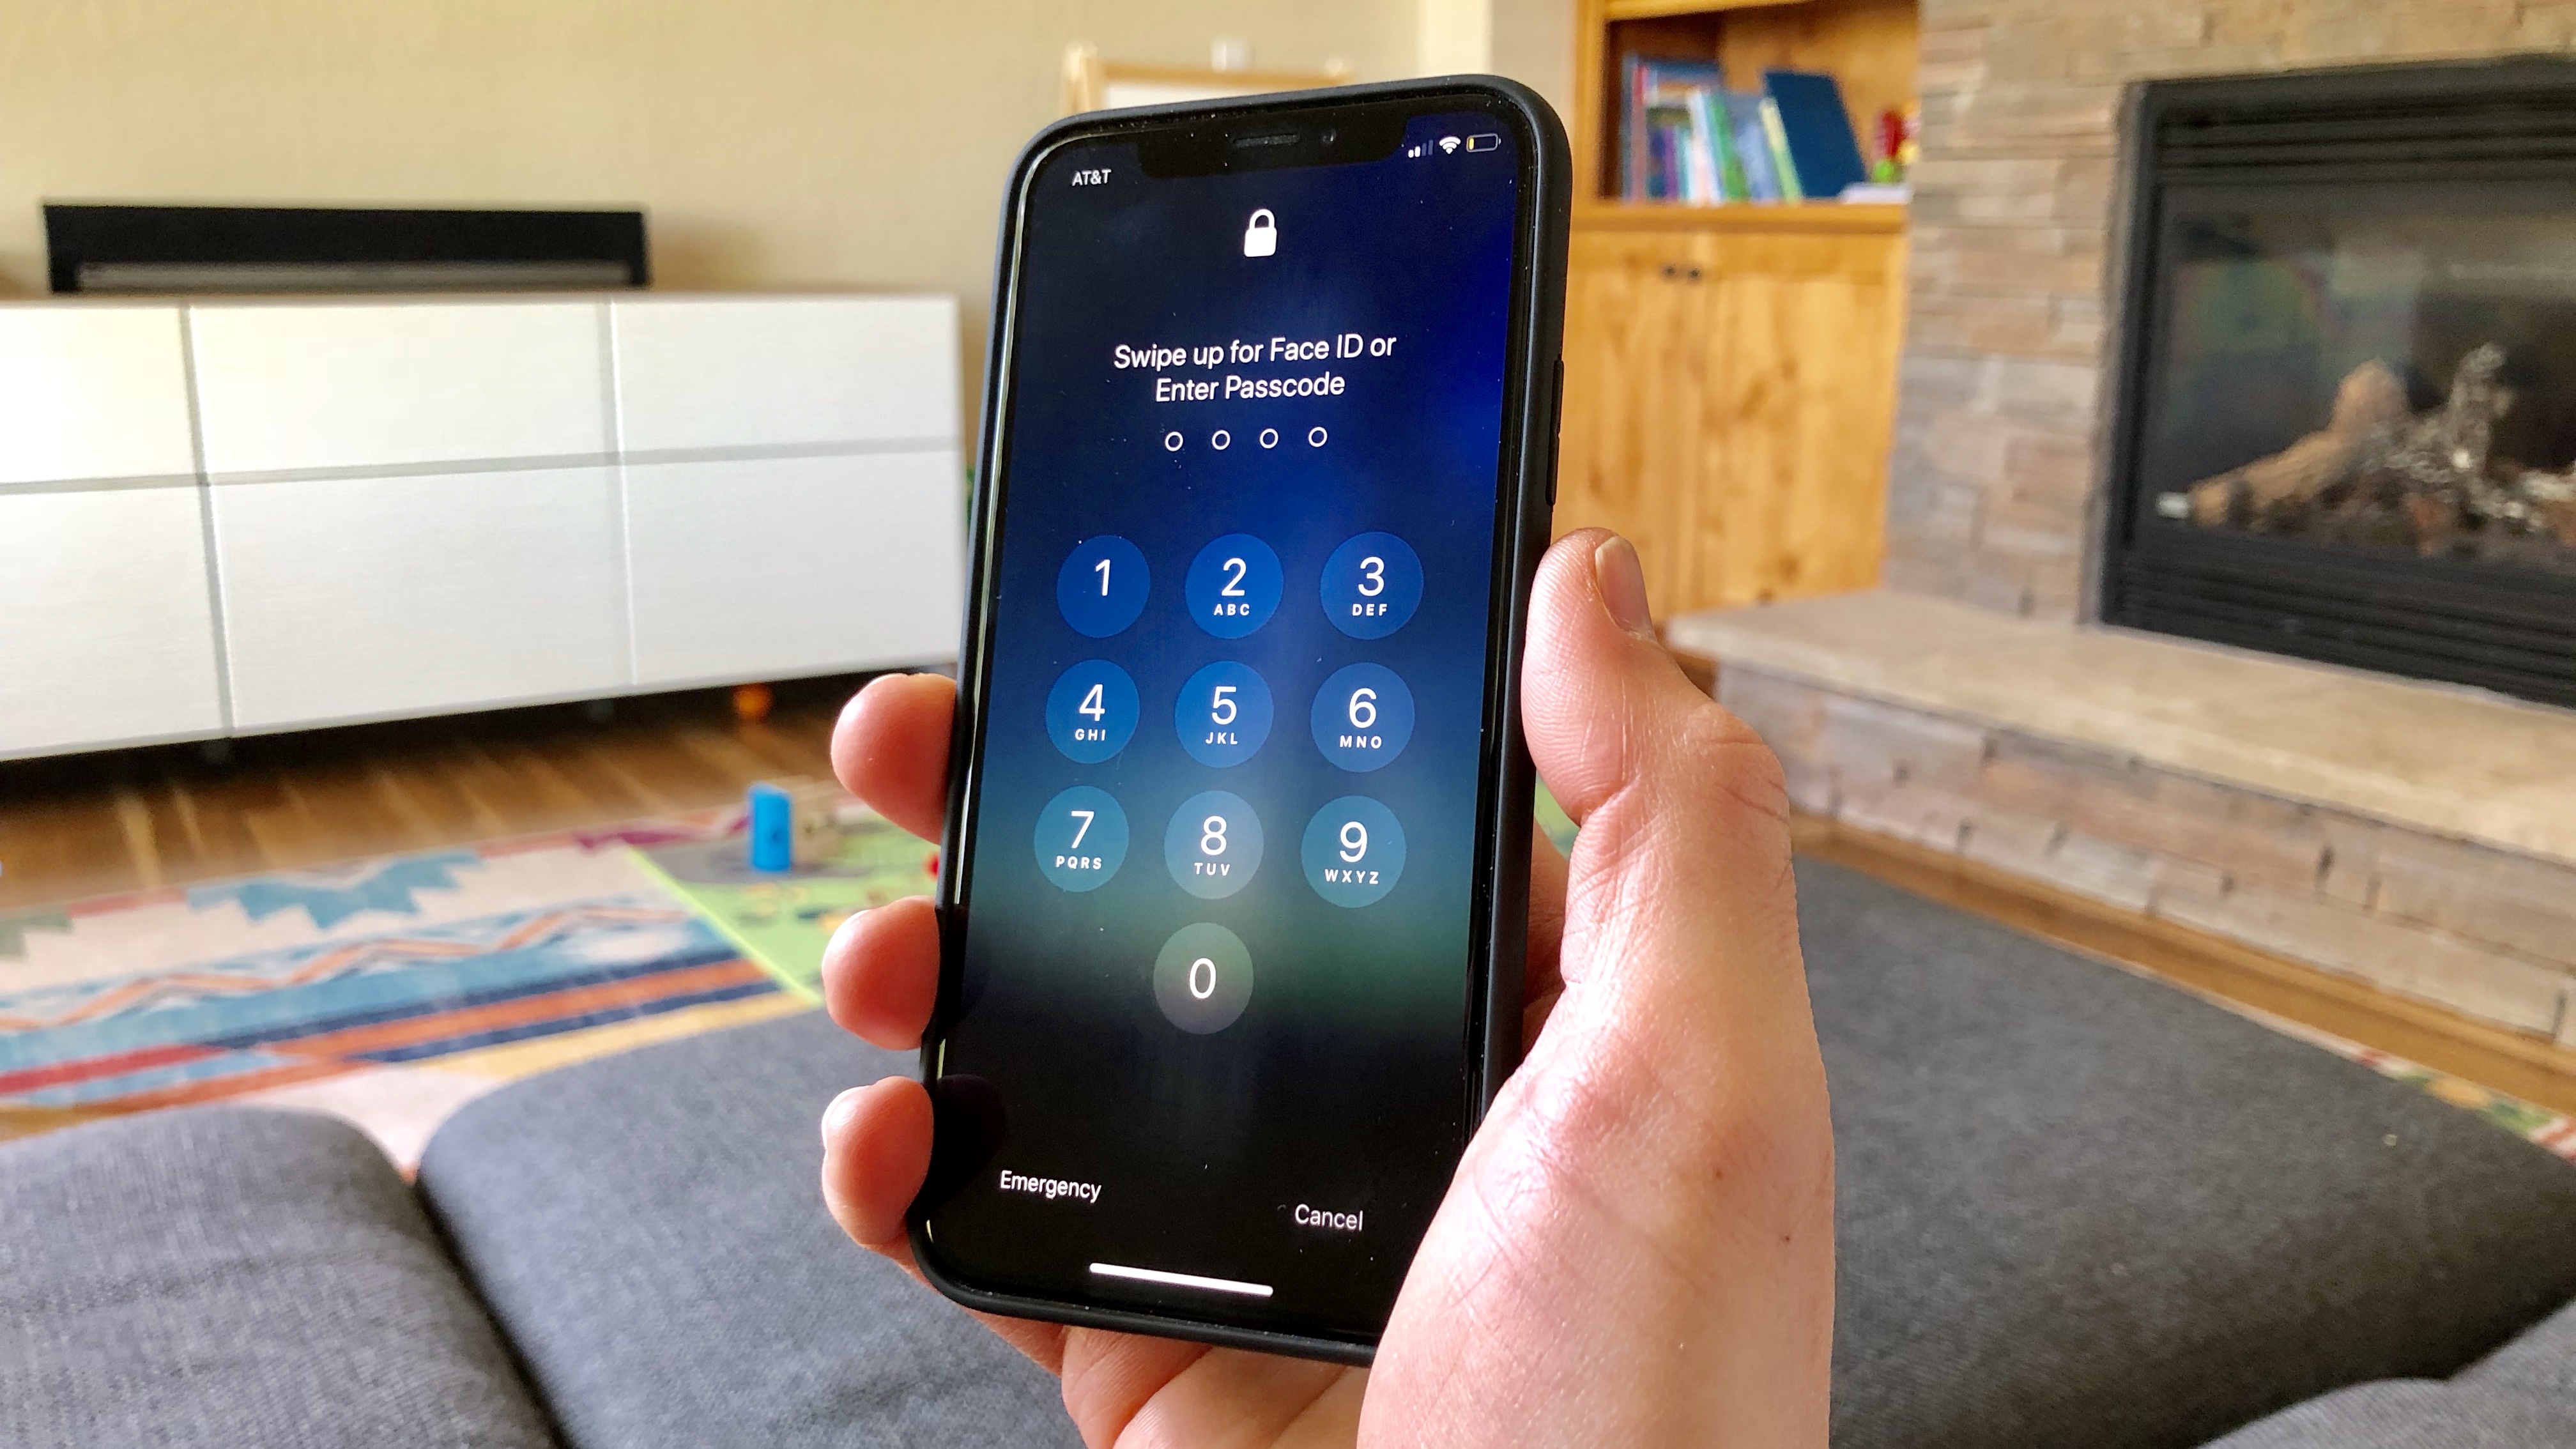 iphone password lock out